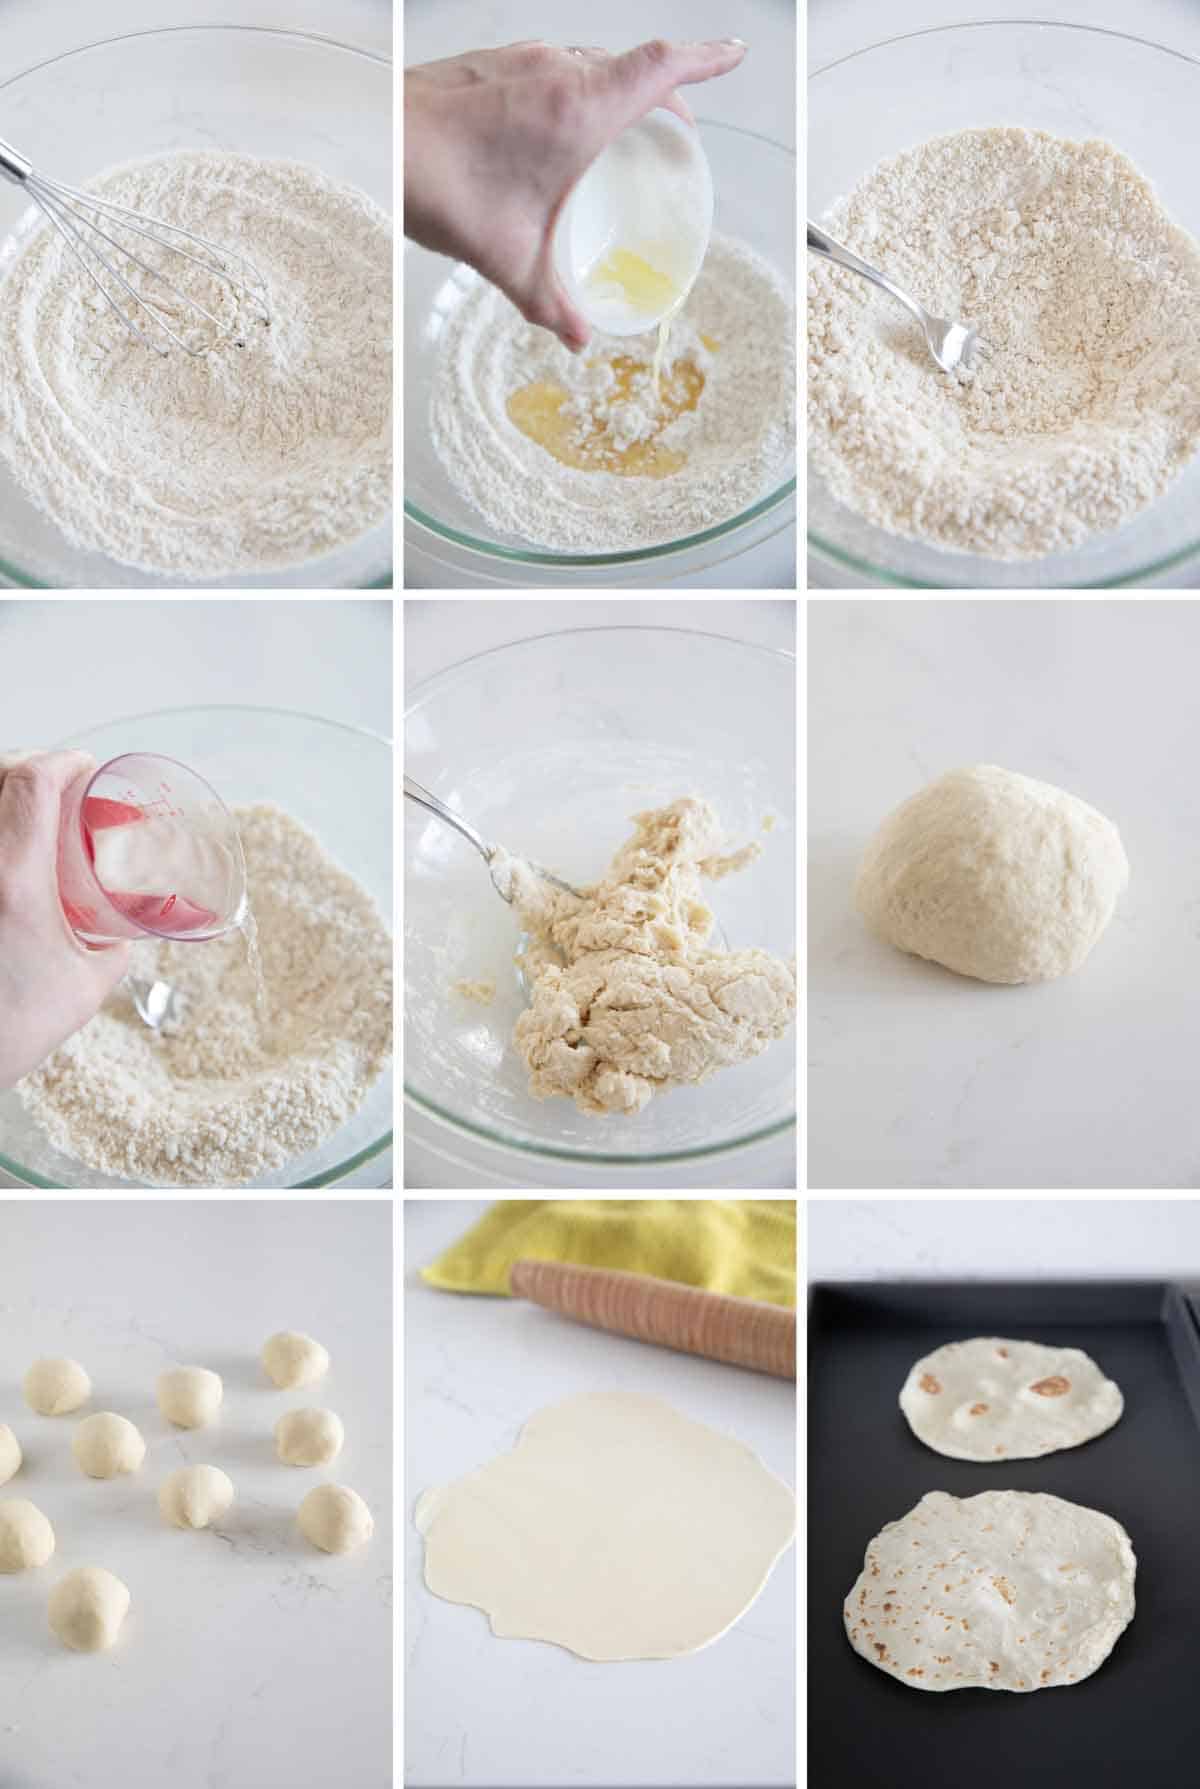 steps showing how to make flour tortillas.